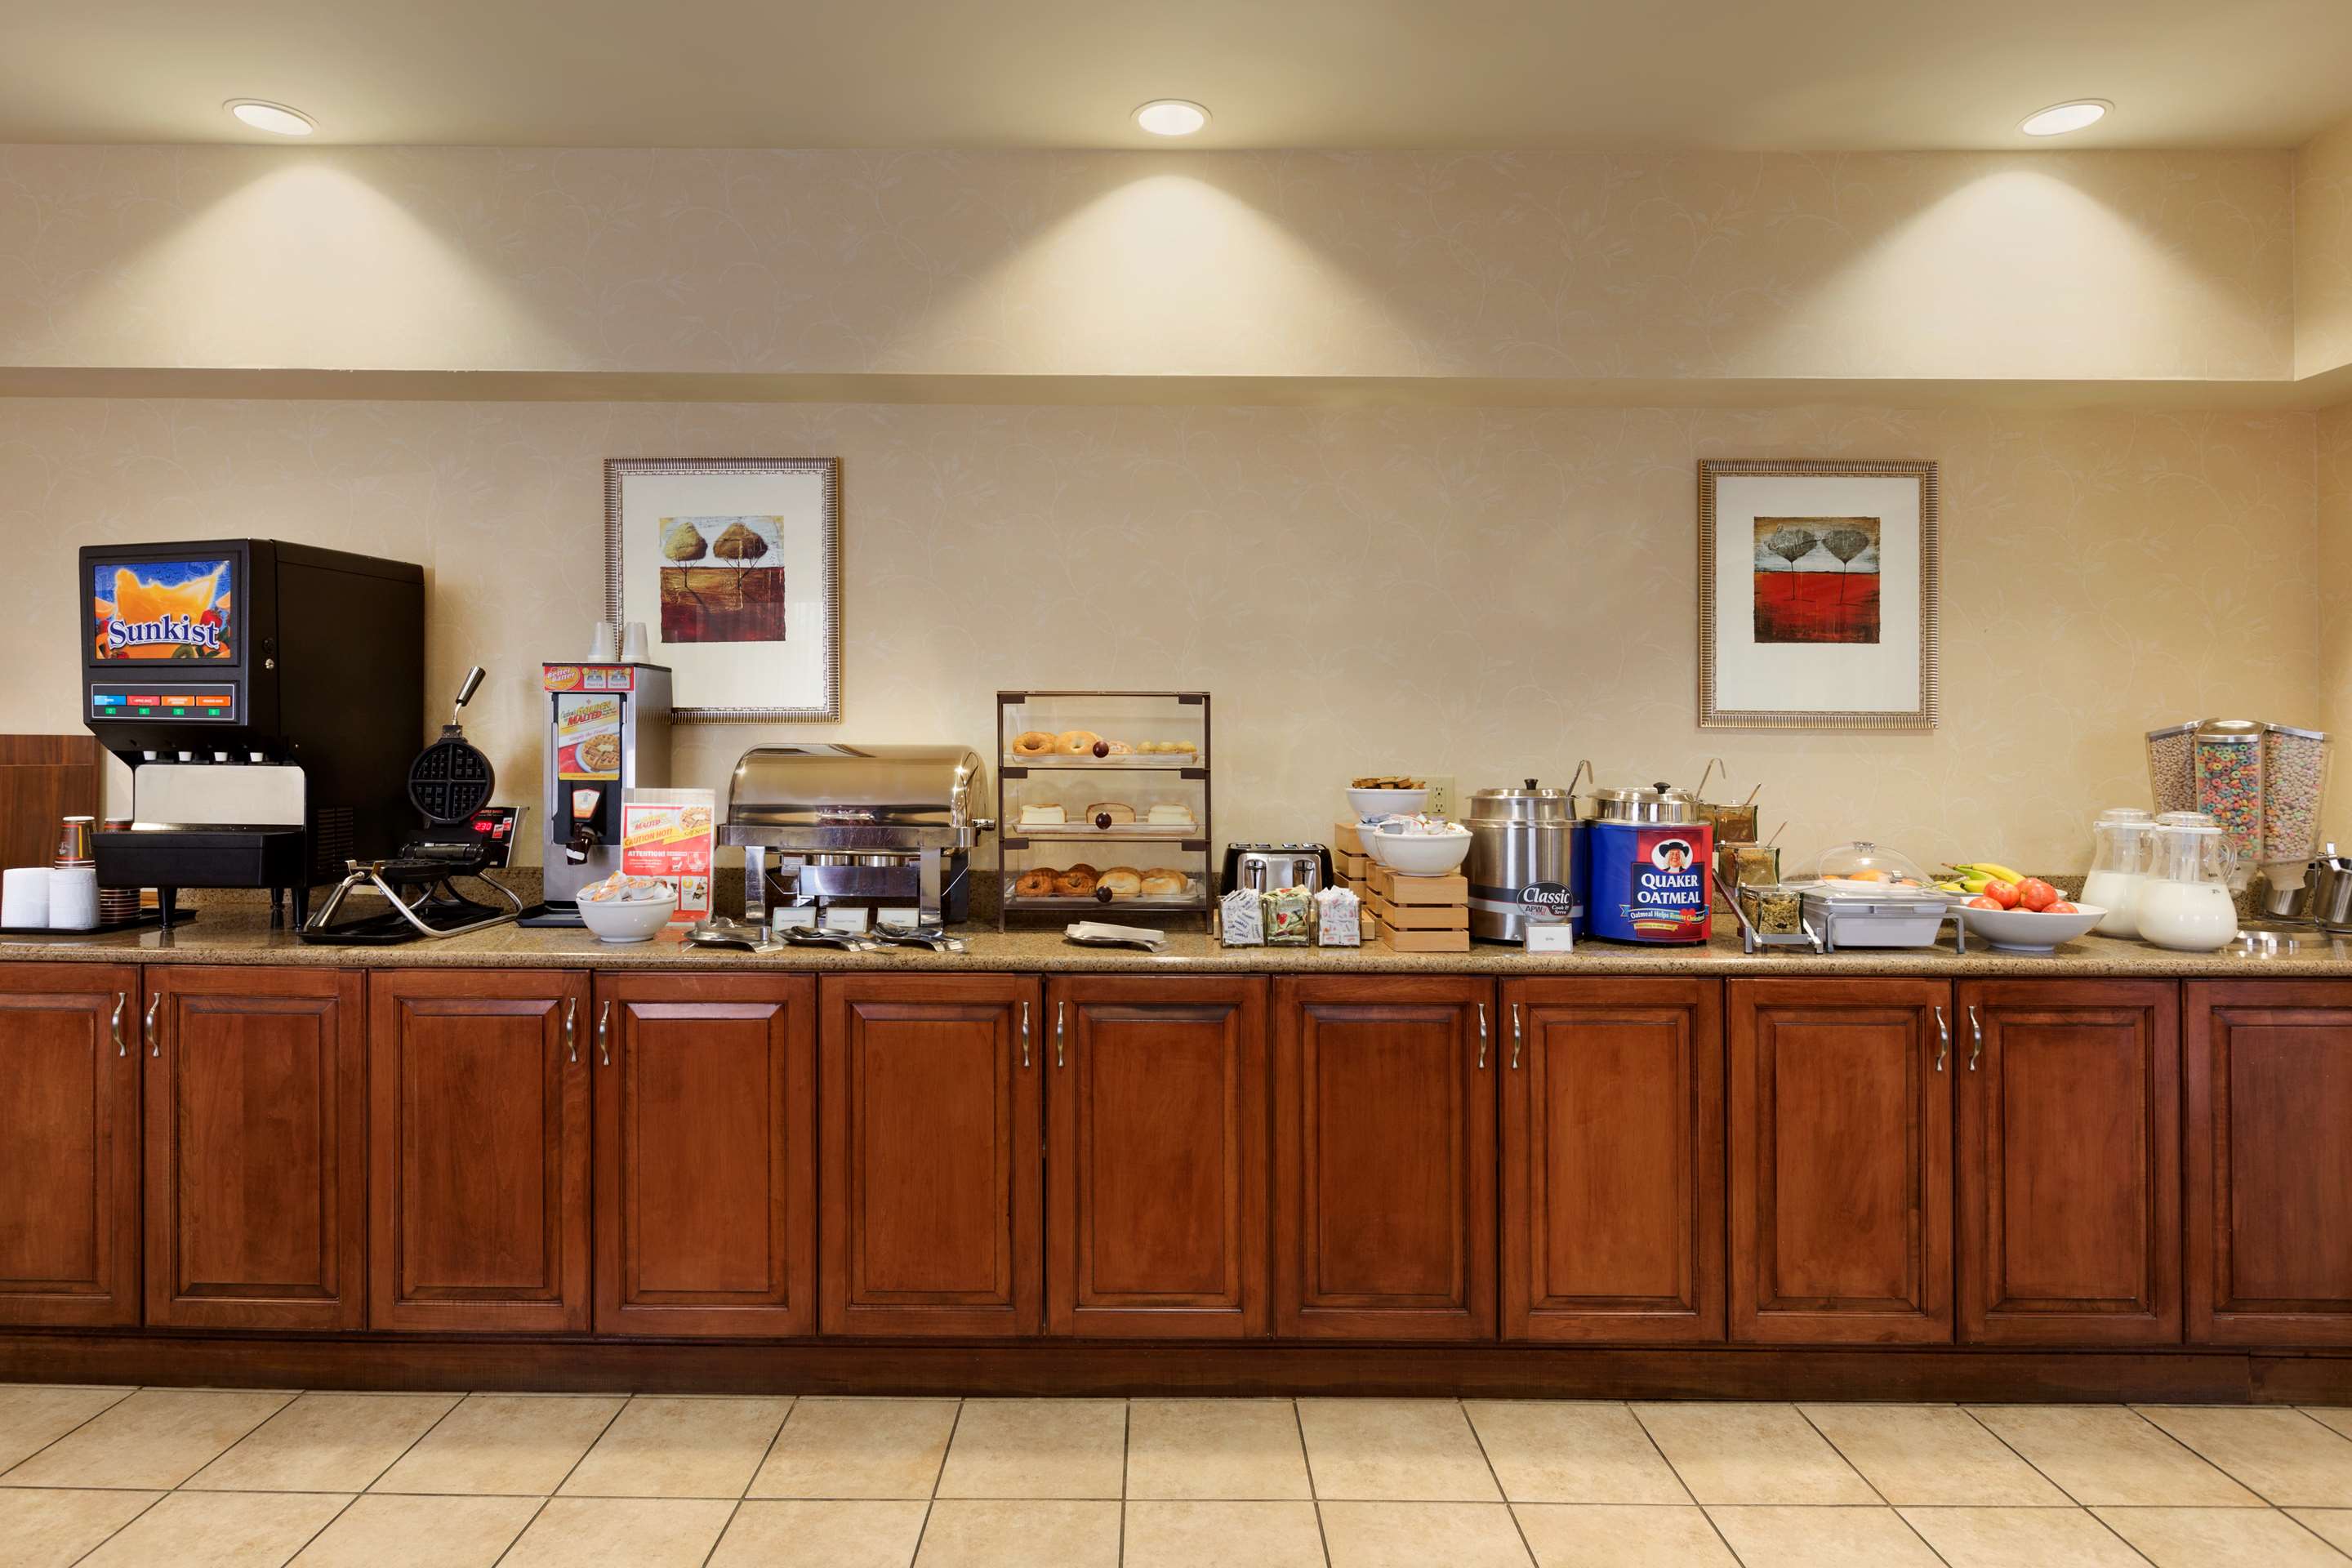 Country Inn & Suites by Radisson, Sumter, SC